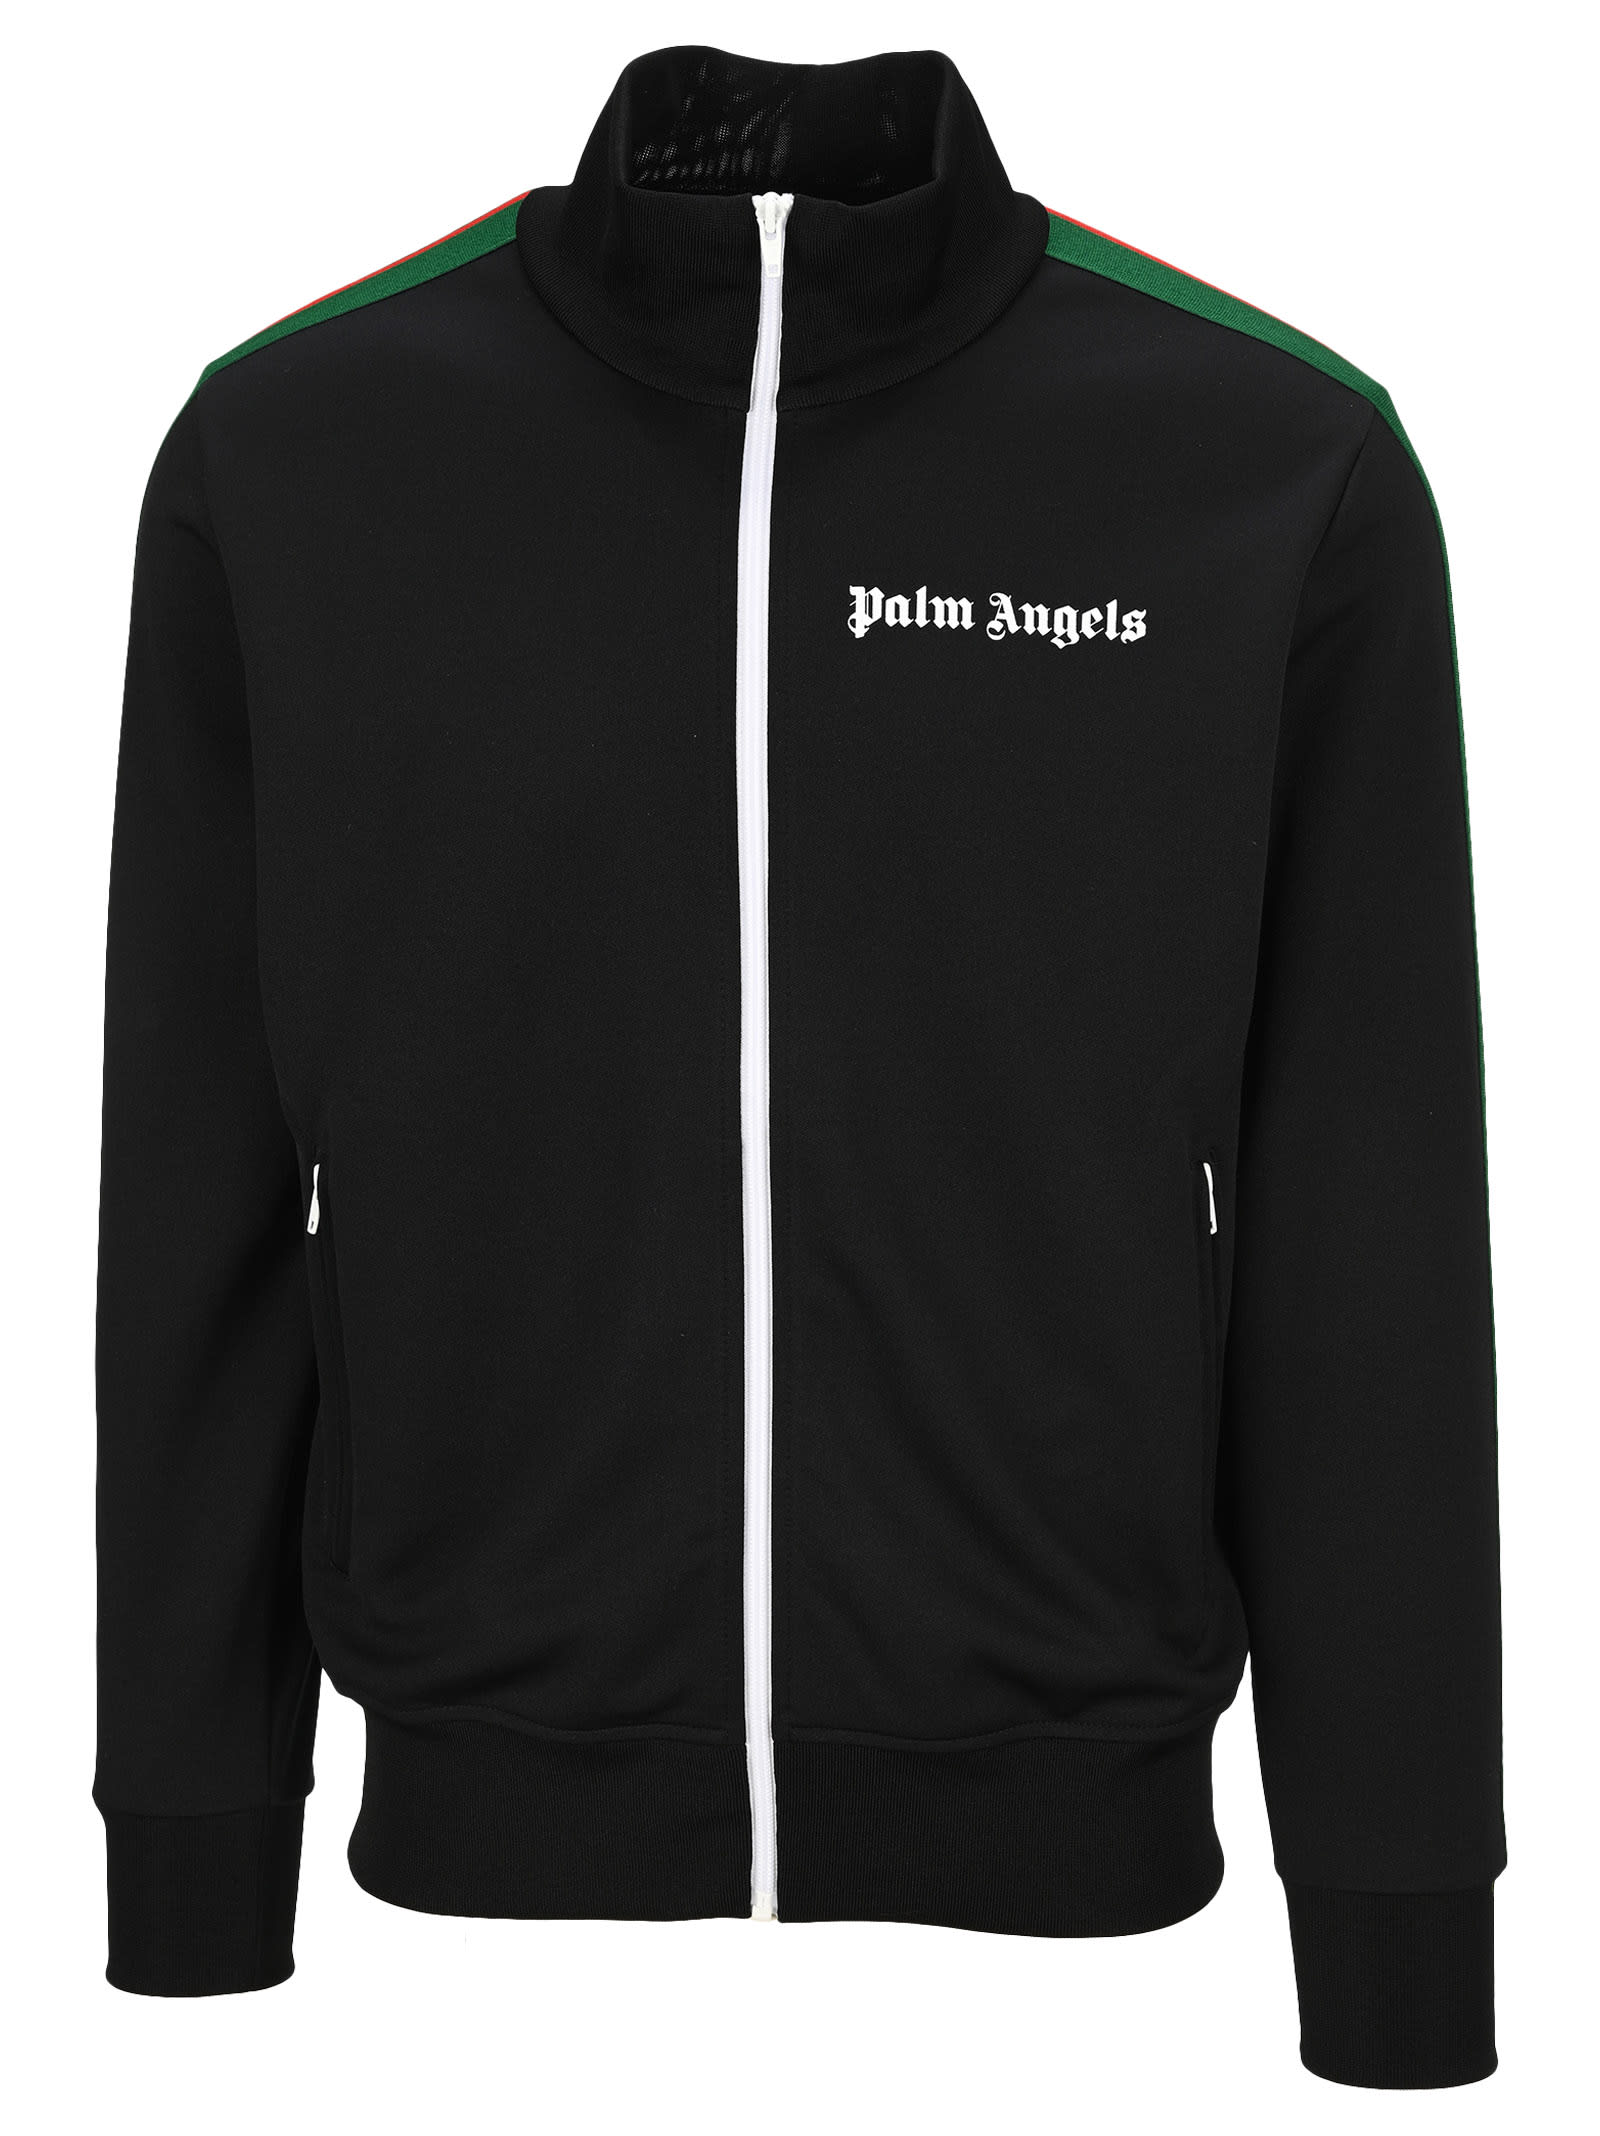 PALM ANGELS COLLEGE TRACK JACKET,PMBD001R21FAB0031001